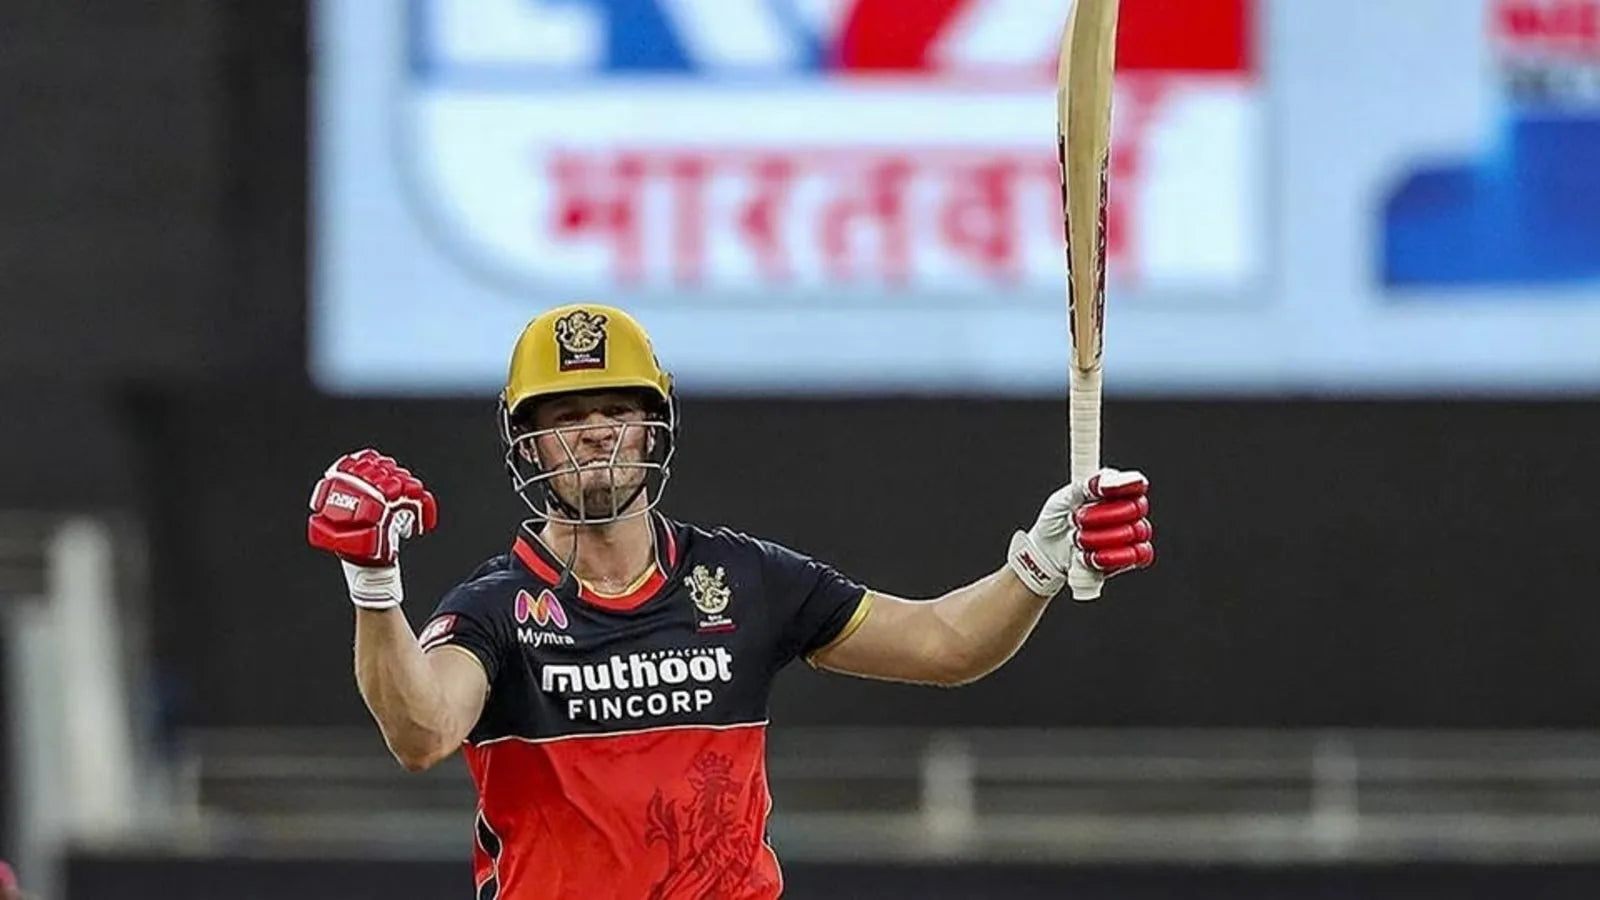 AB de Villiers celebrates by raising his bat after playing a magical innings against Gujarat Lions in the 2016 IPL Qualifier 2